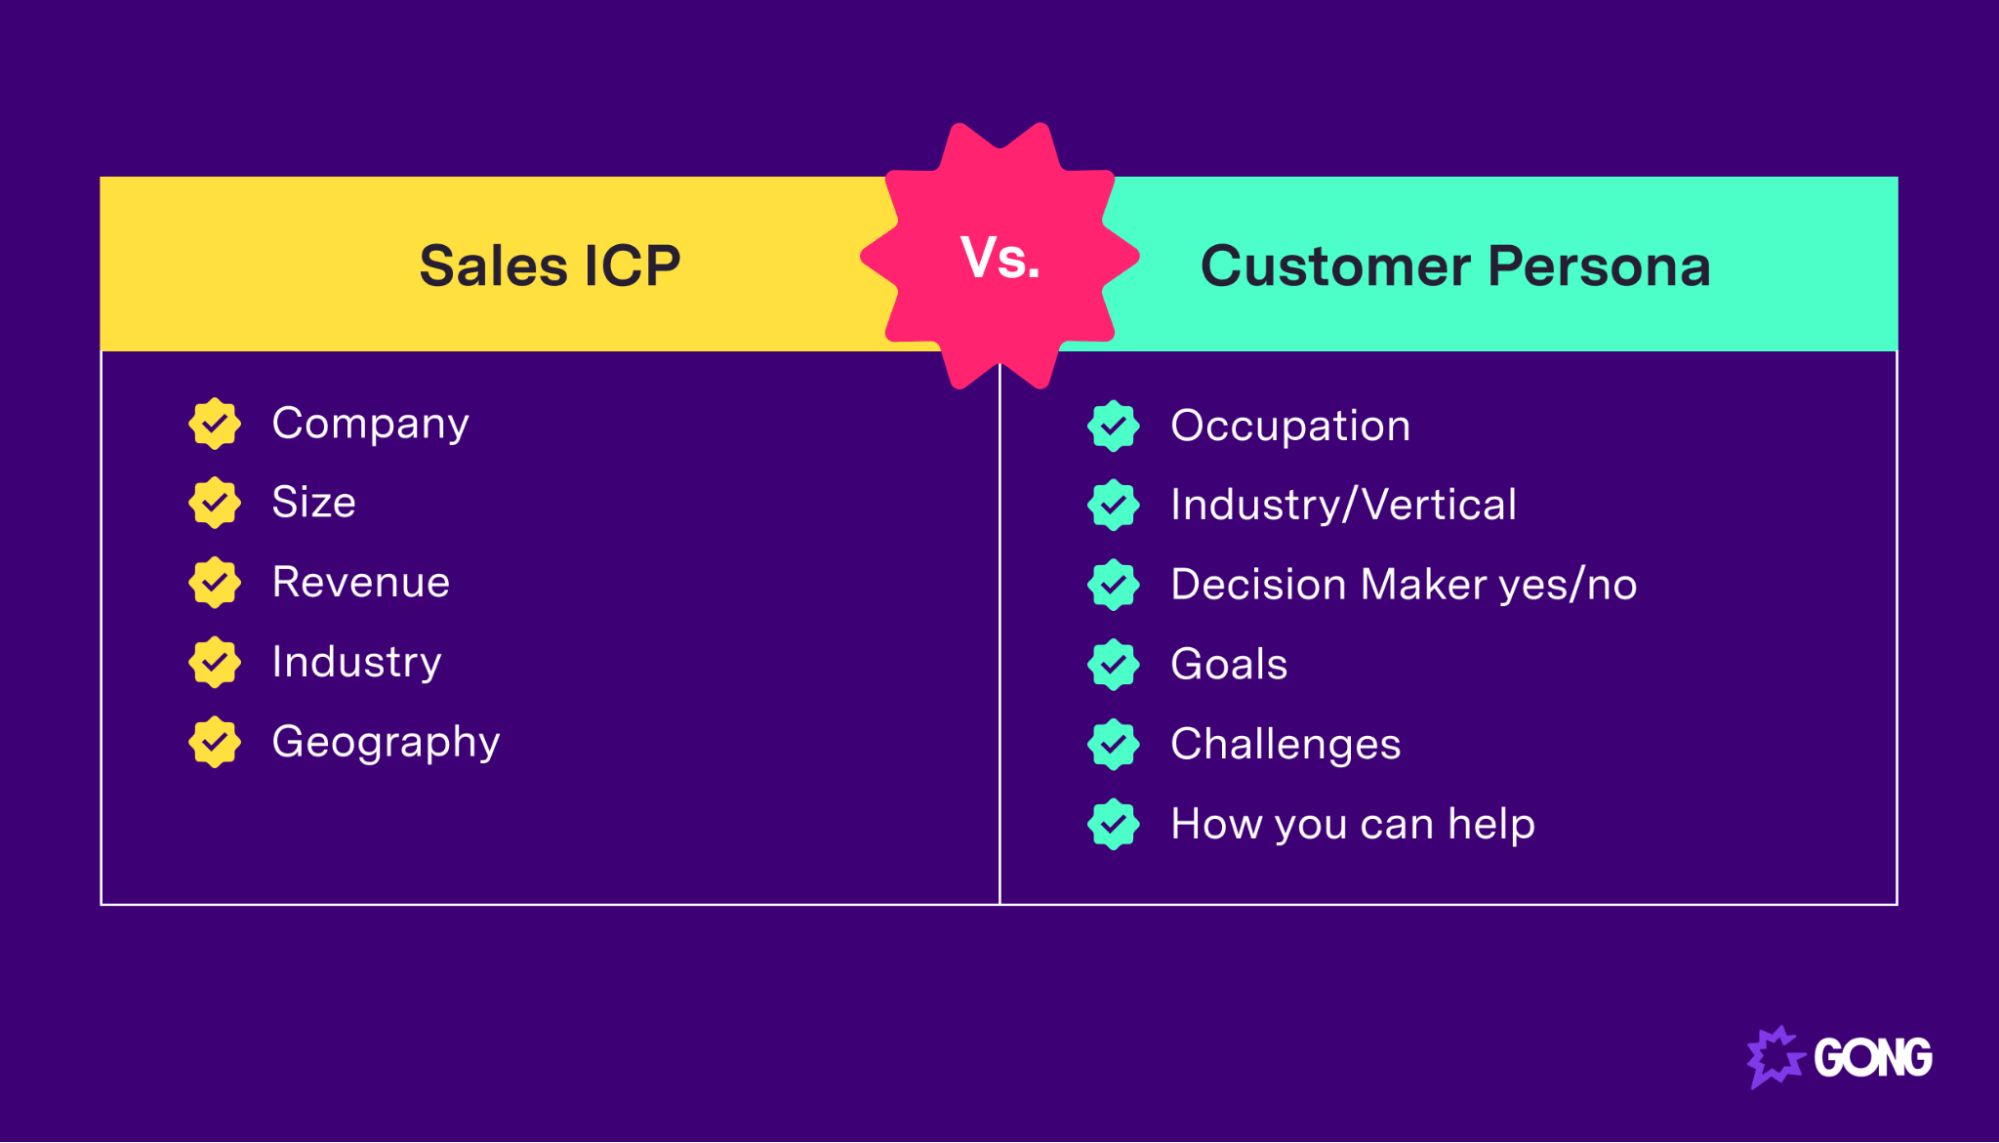 The difference between customer personas and ICPs